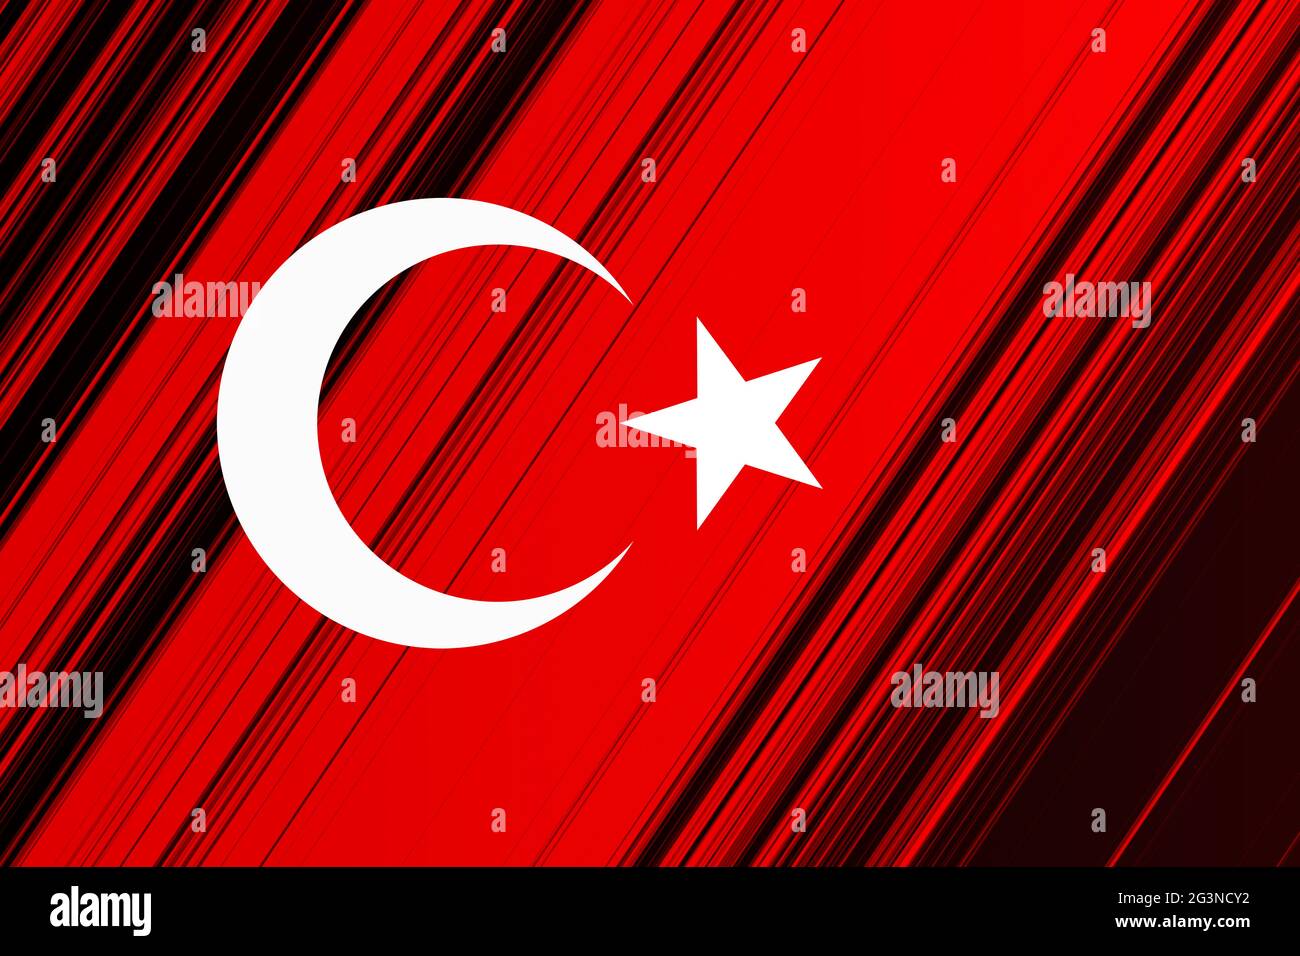 Turkish National Flag With White Star And Moon On Red Background Stock Photo Alamy